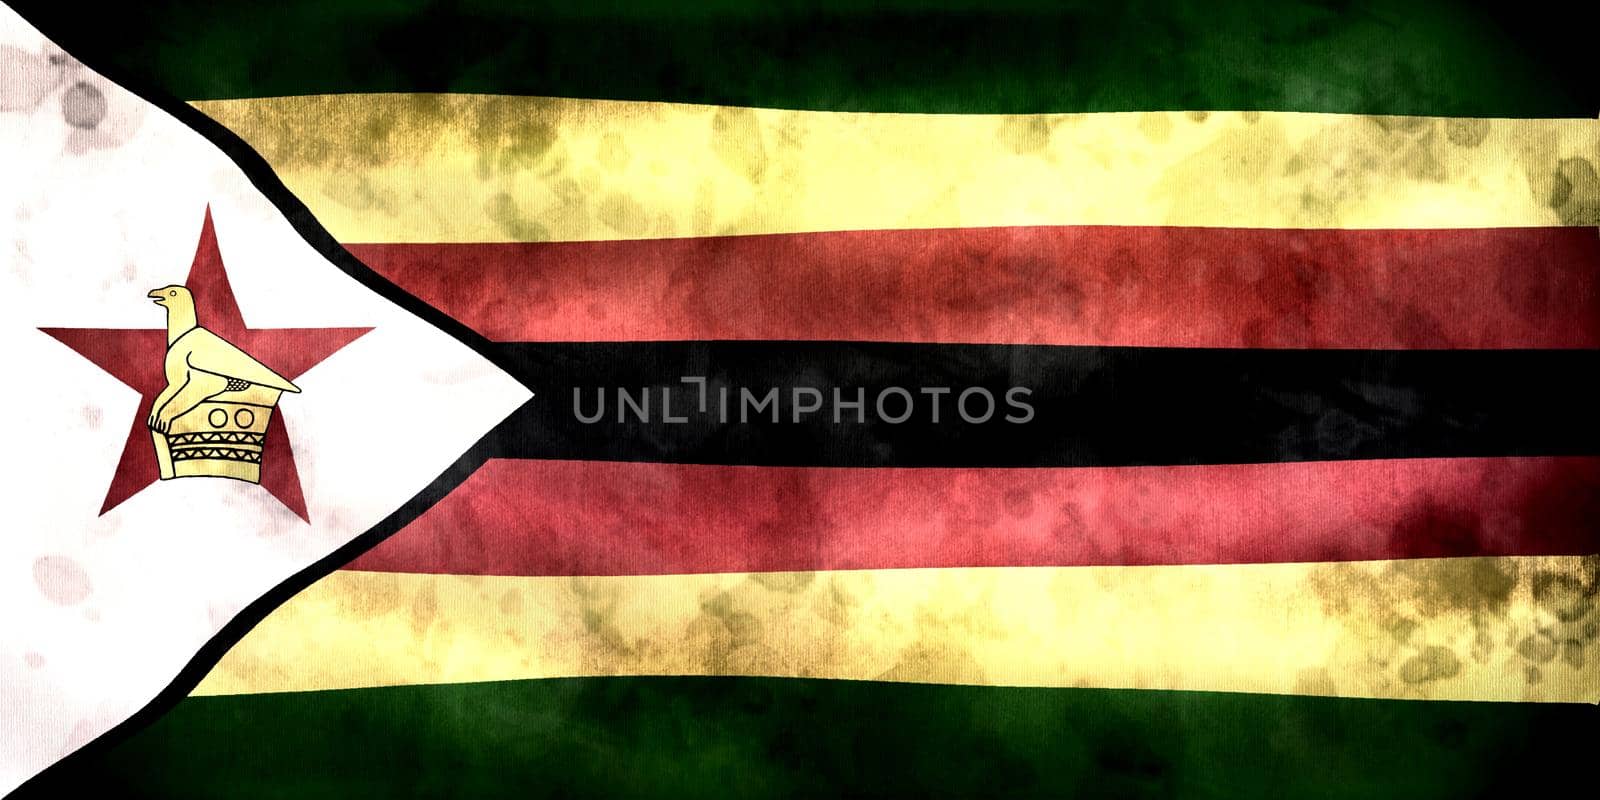 3D-Illustration of a Zimbabwe flag - realistic waving fabric flag by MP_foto71